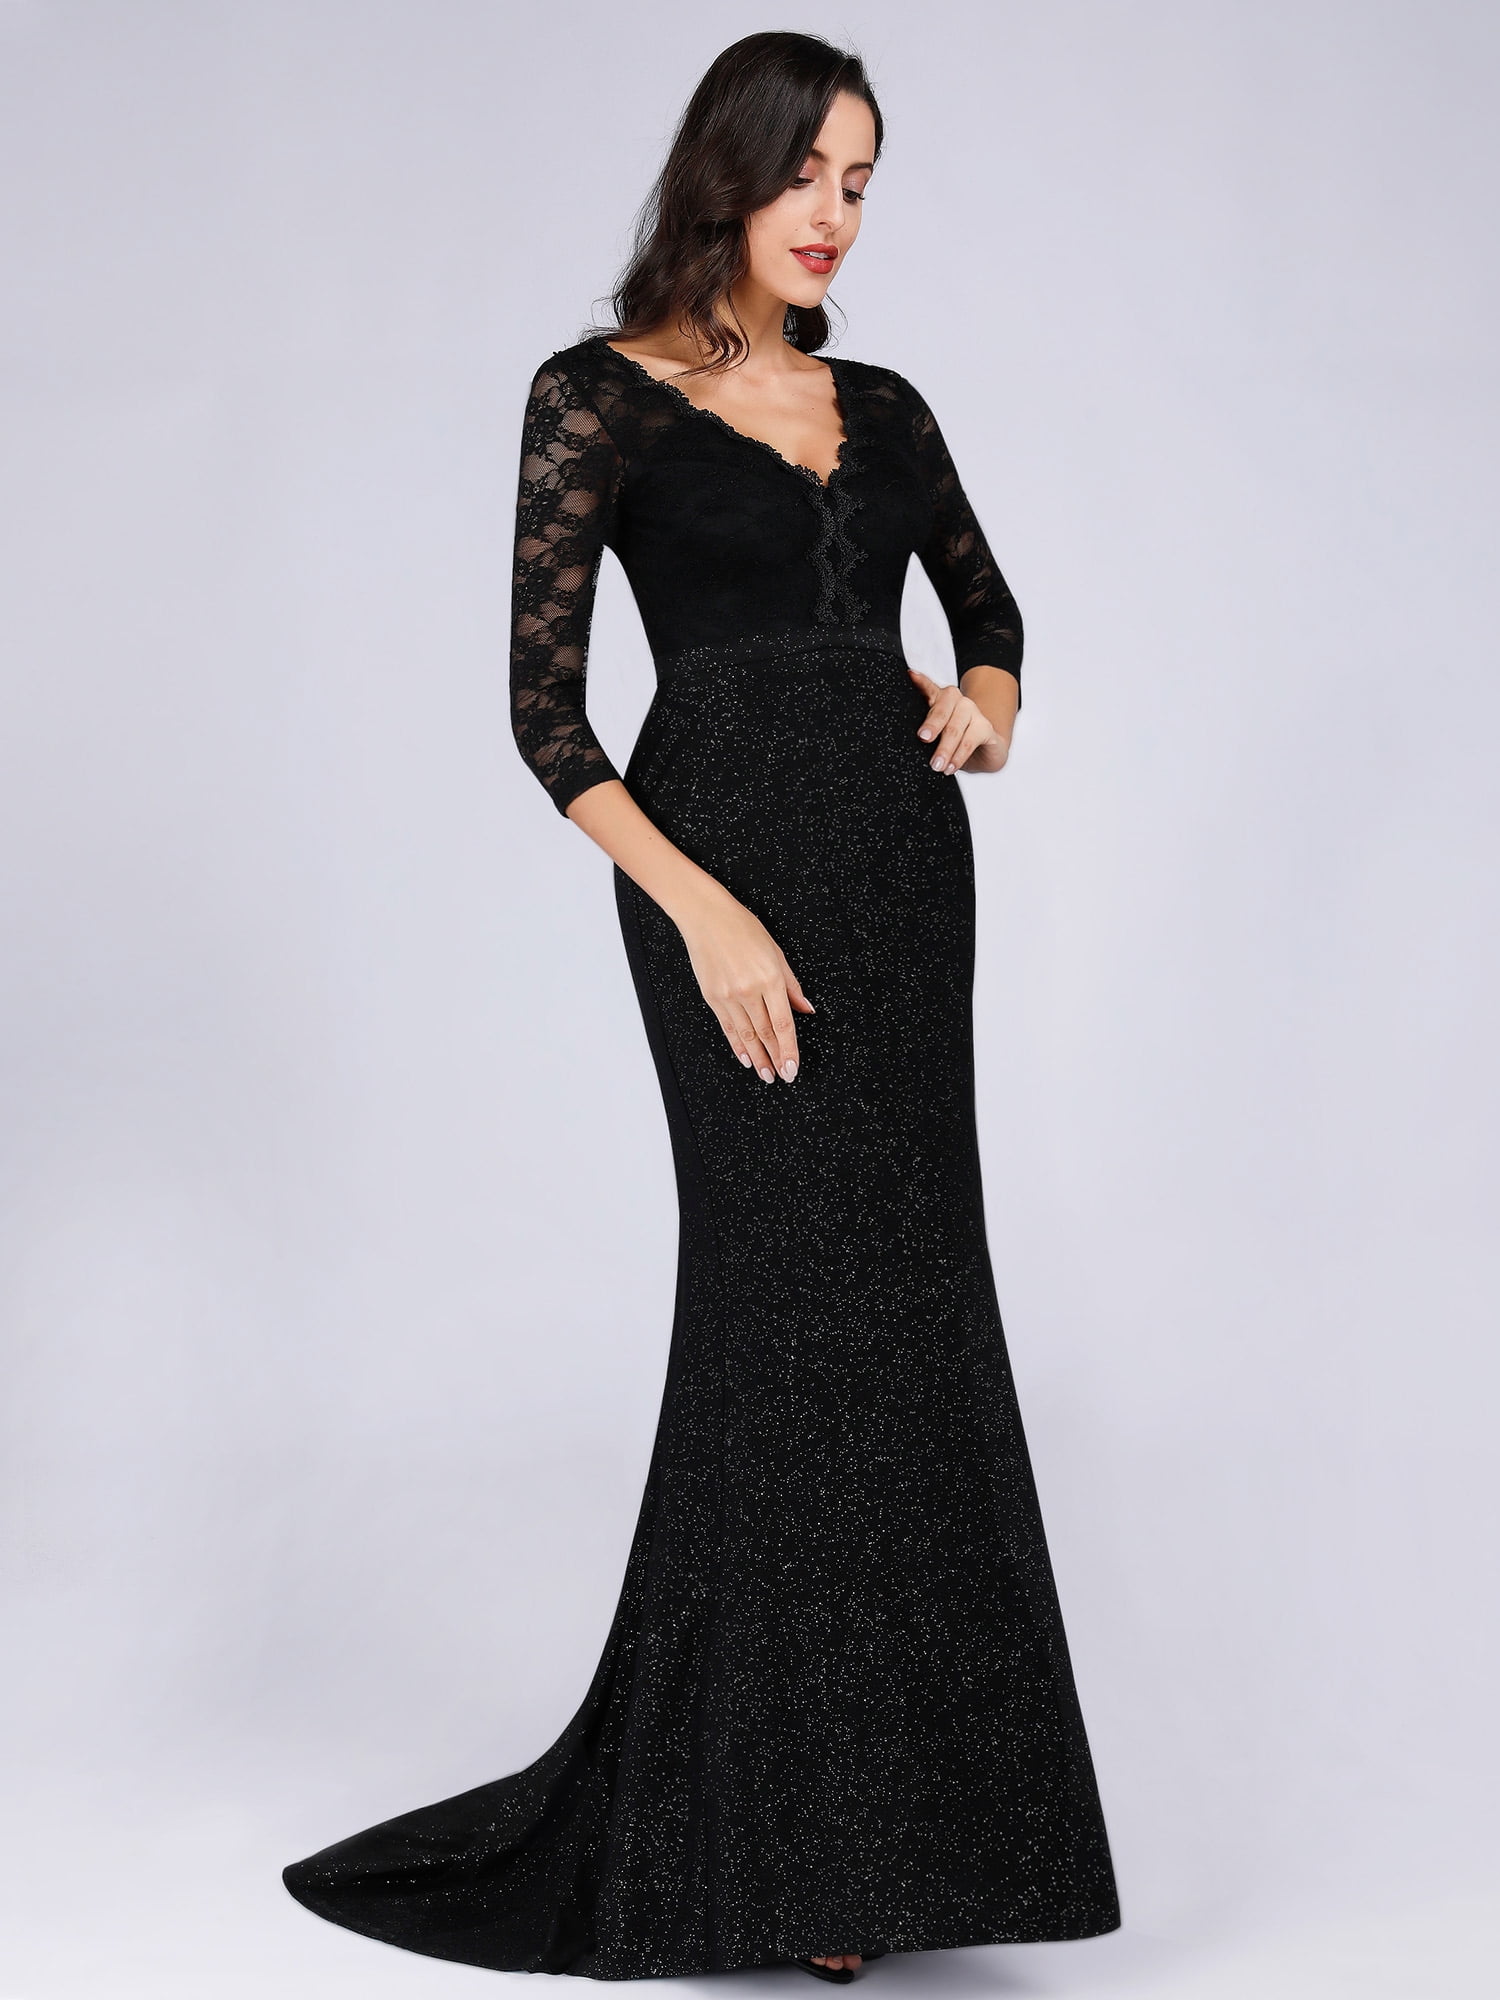 women's special occasion dresses